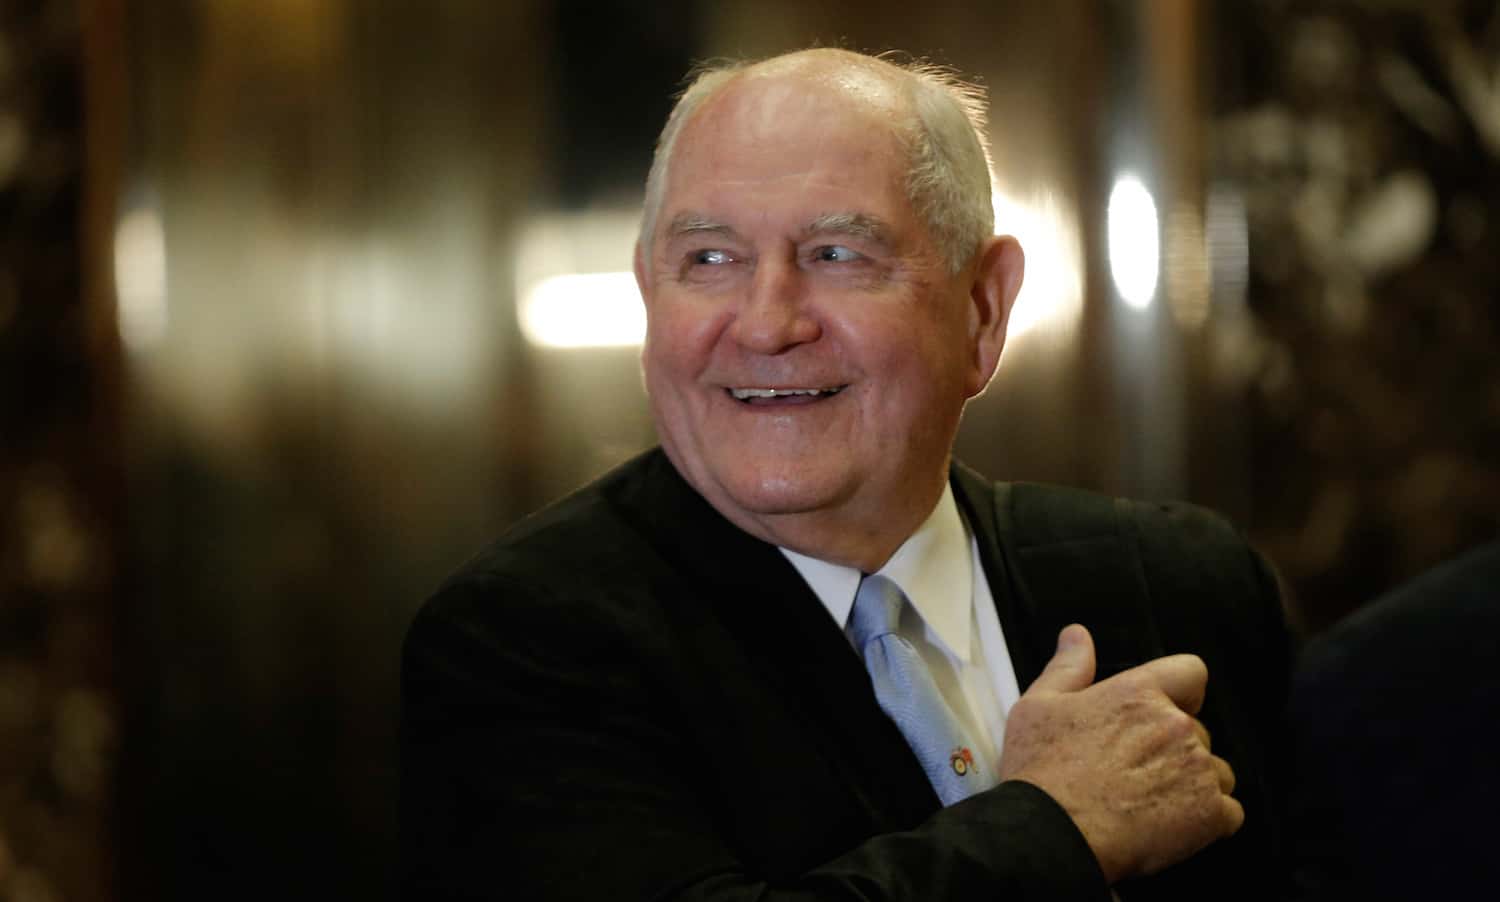 Sonny Perdue is President-elect Trump's Nominee for Secretary of Agriculture